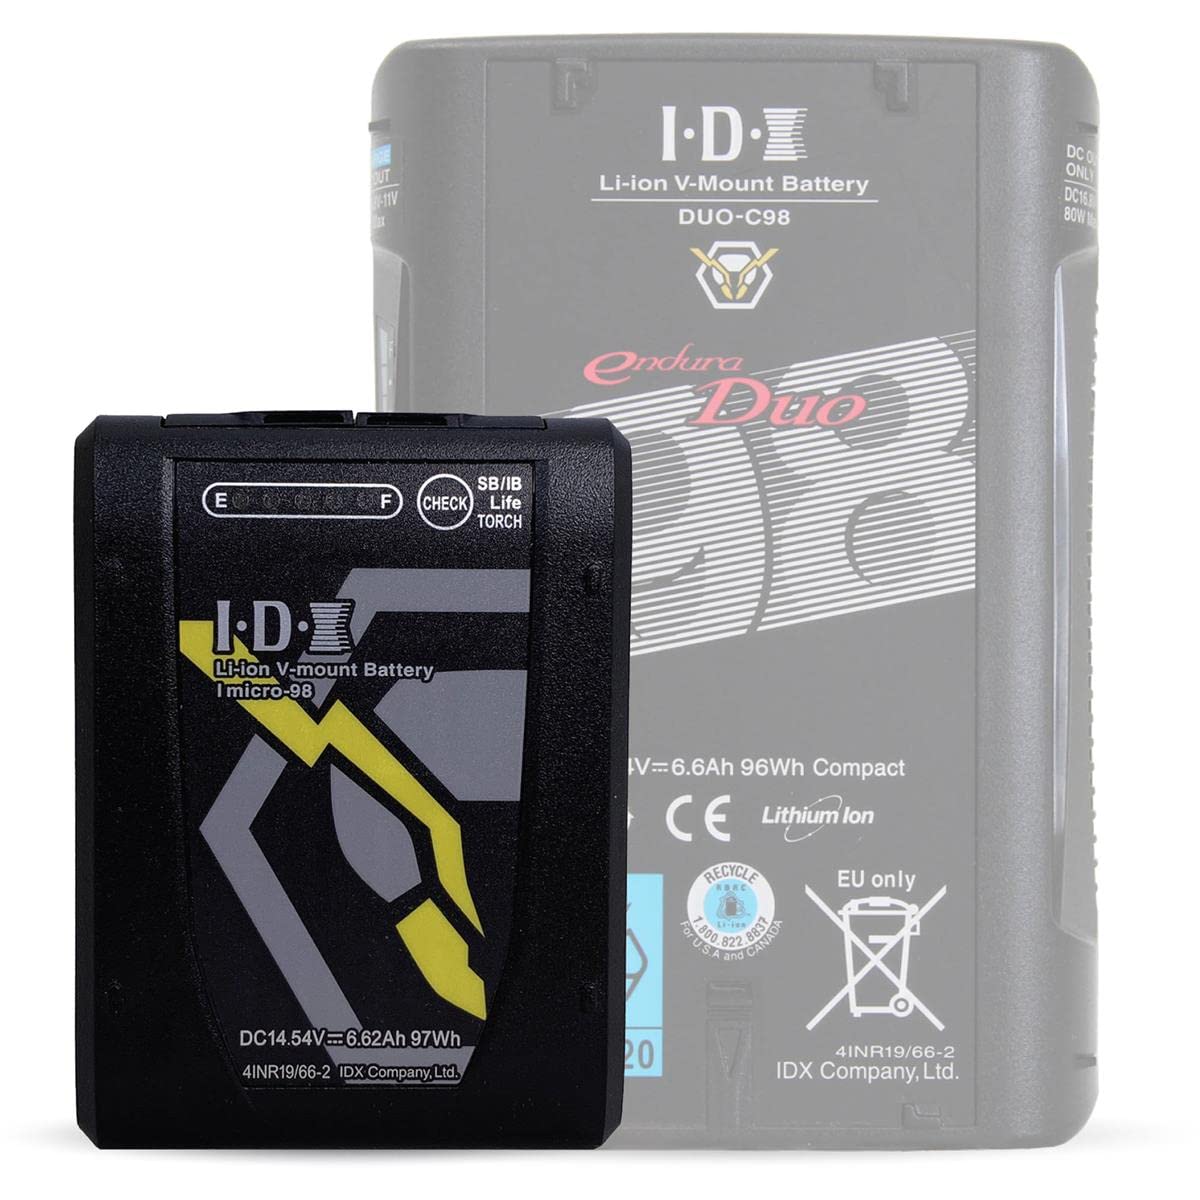 IDX IMICRO-98 Compact 97Wh Lithium-Ion Battery with Two D-Tap Outputs